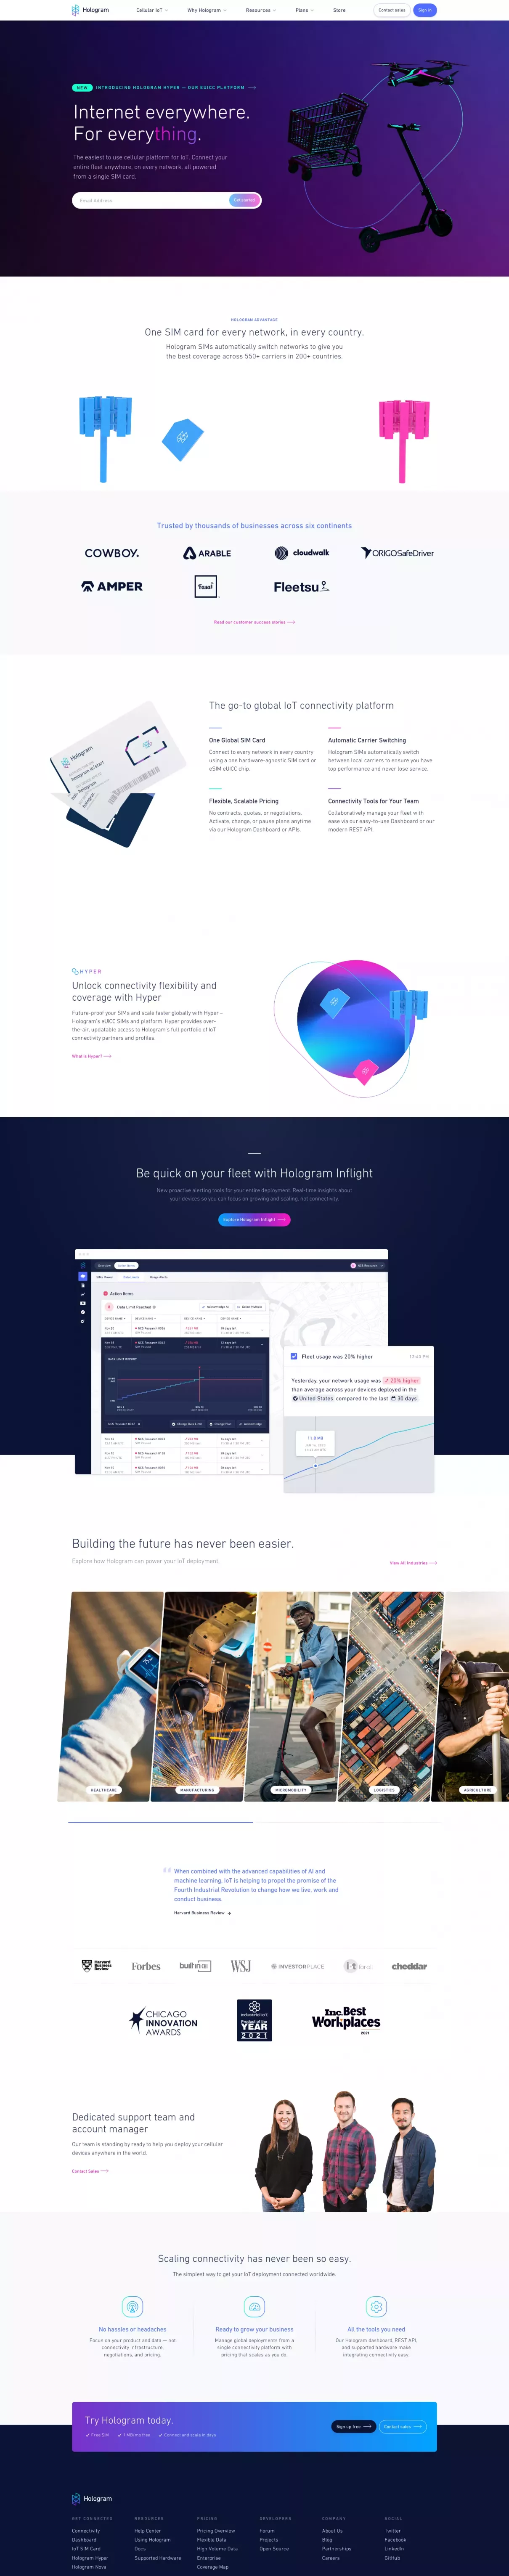 Perfect web design by hologram